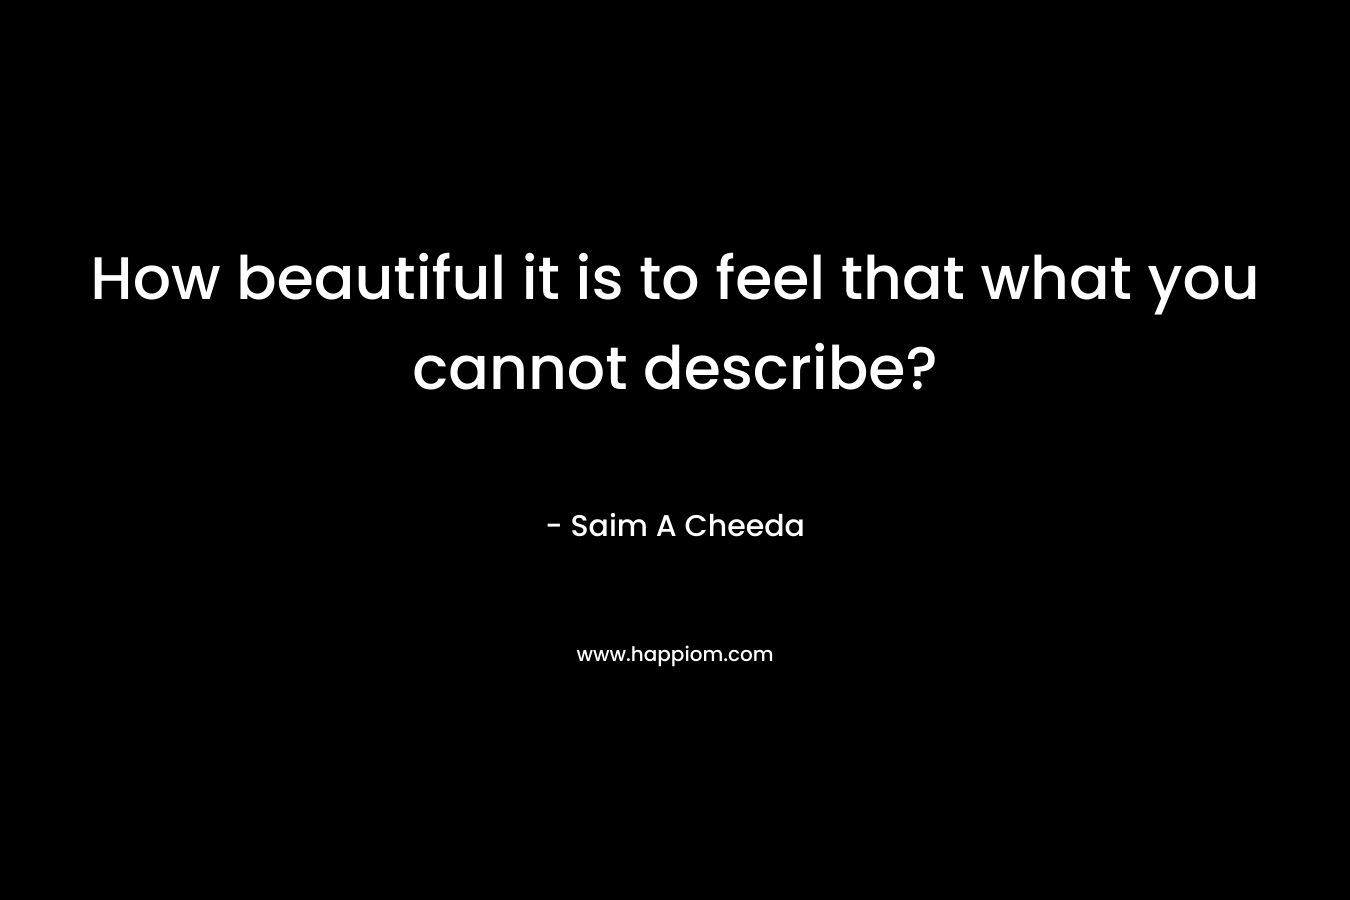 How beautiful it is to feel that what you cannot describe?